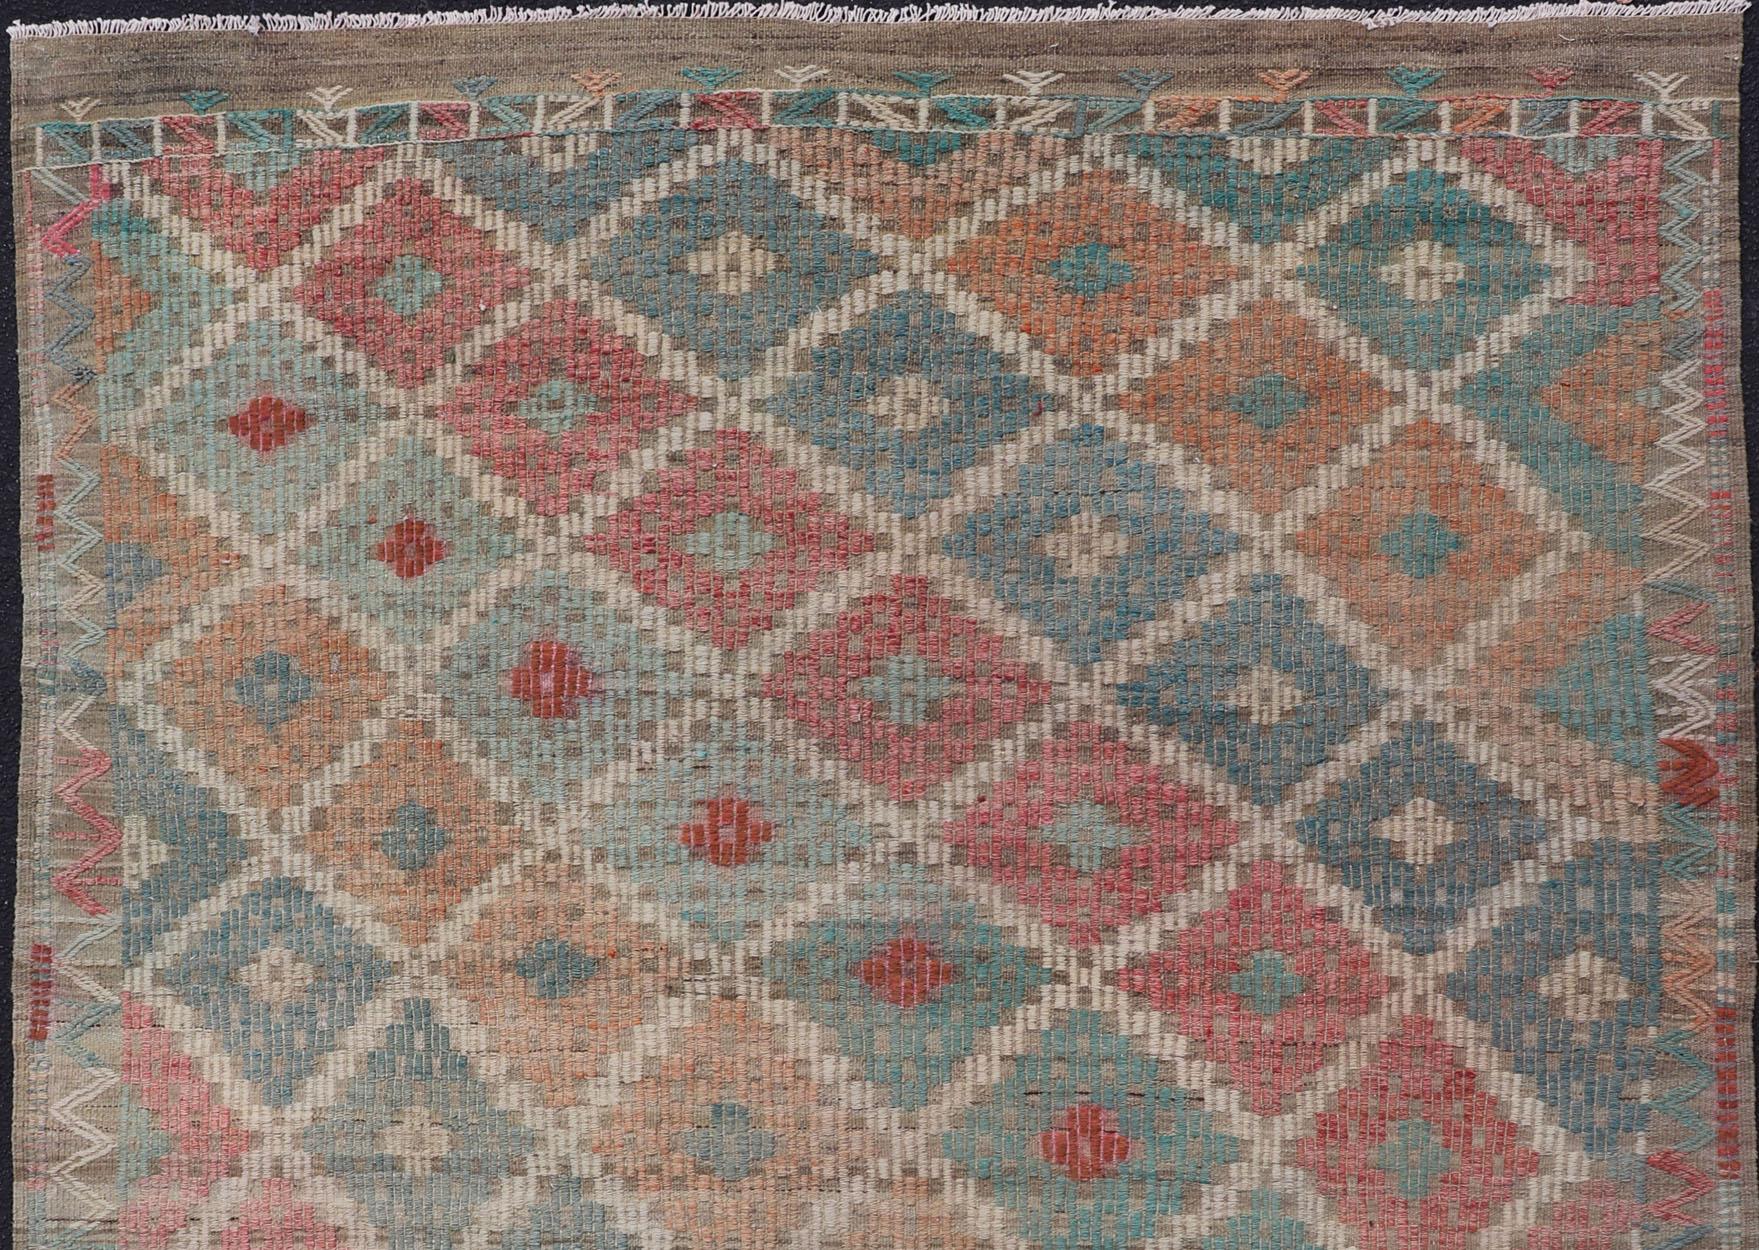 Vintage Kilim Rug with all-over geometric design in soft array of colors. Keivan Woven Arts / rug EN-P13428, country of origin / type: Turkey / Kilim, circa Mid-20th Century.

Measures: 6'6 x 9'0.